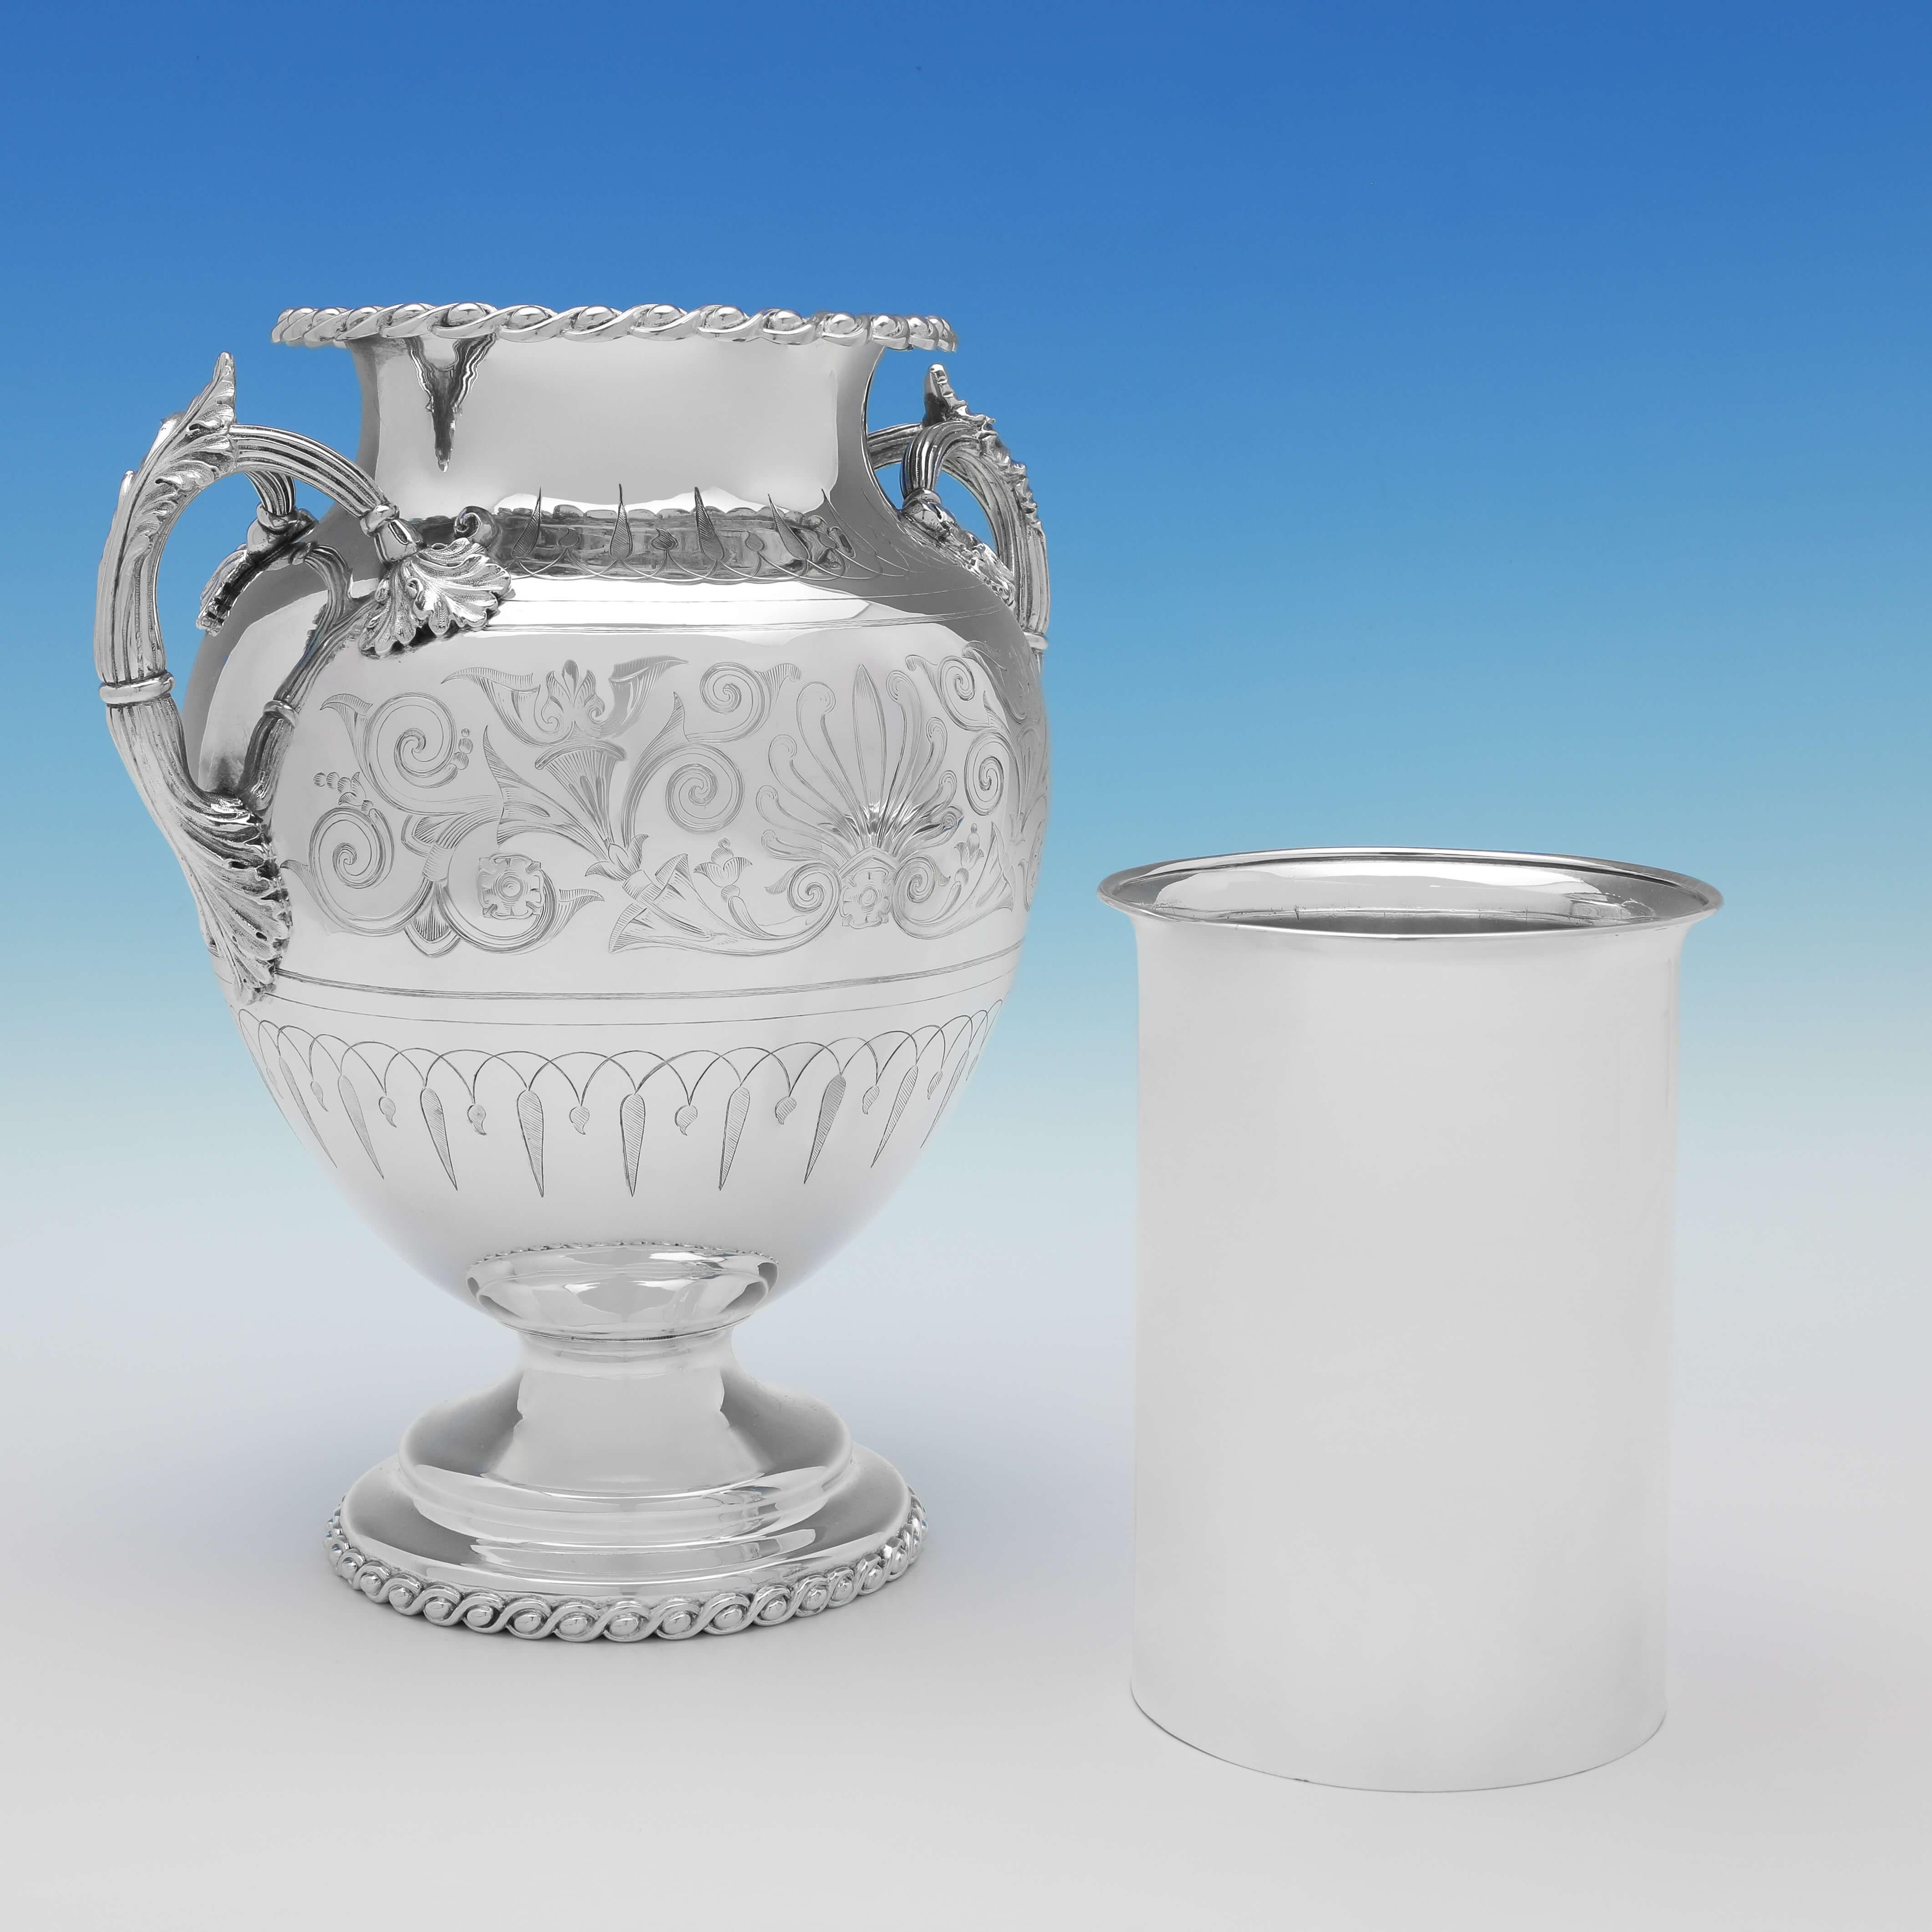 English Amphora Shaped Neoclassical Revival Silver Plated Pair of Wine Coolers from 1855